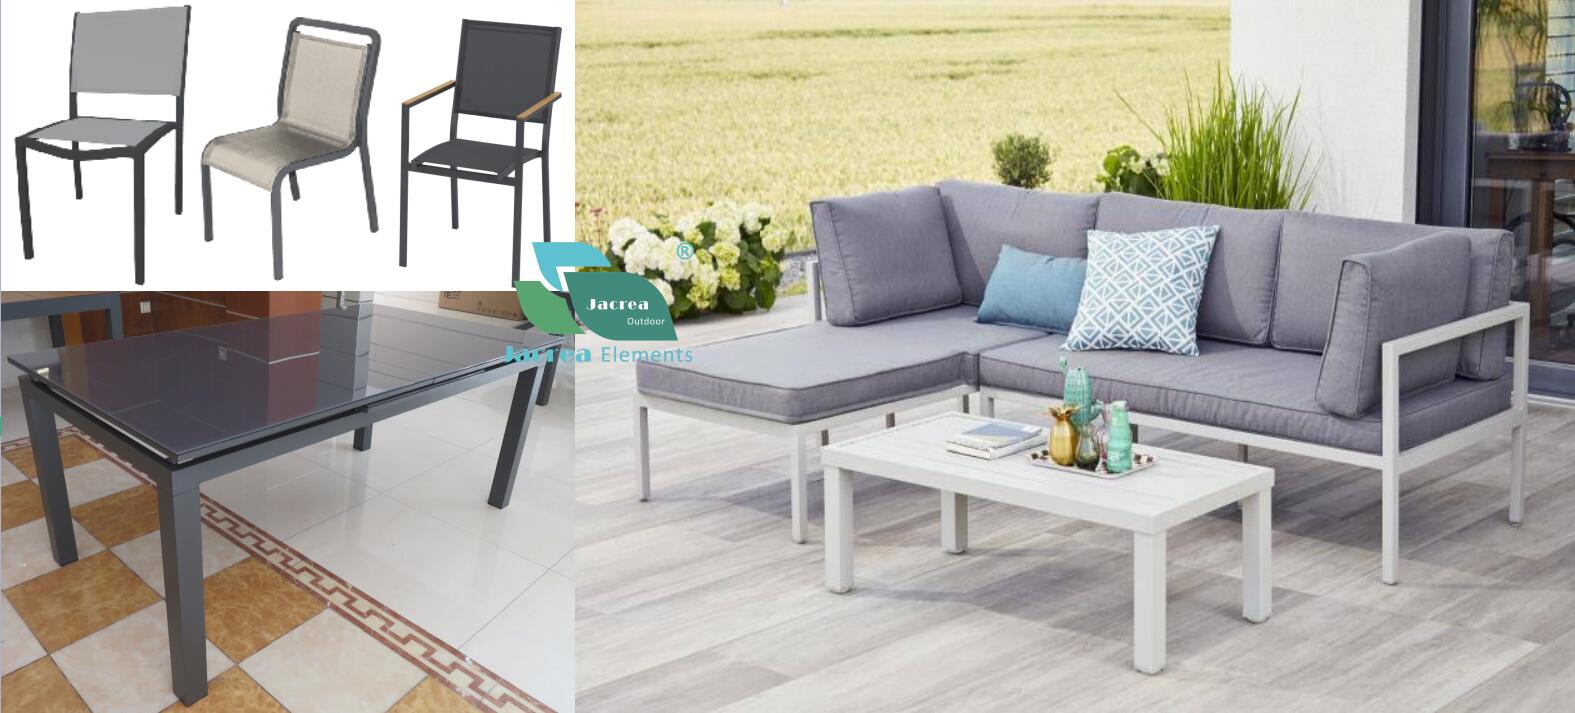 Discover Our New DIY Designs: Extension Tables, Chairs, and Sofa Sets